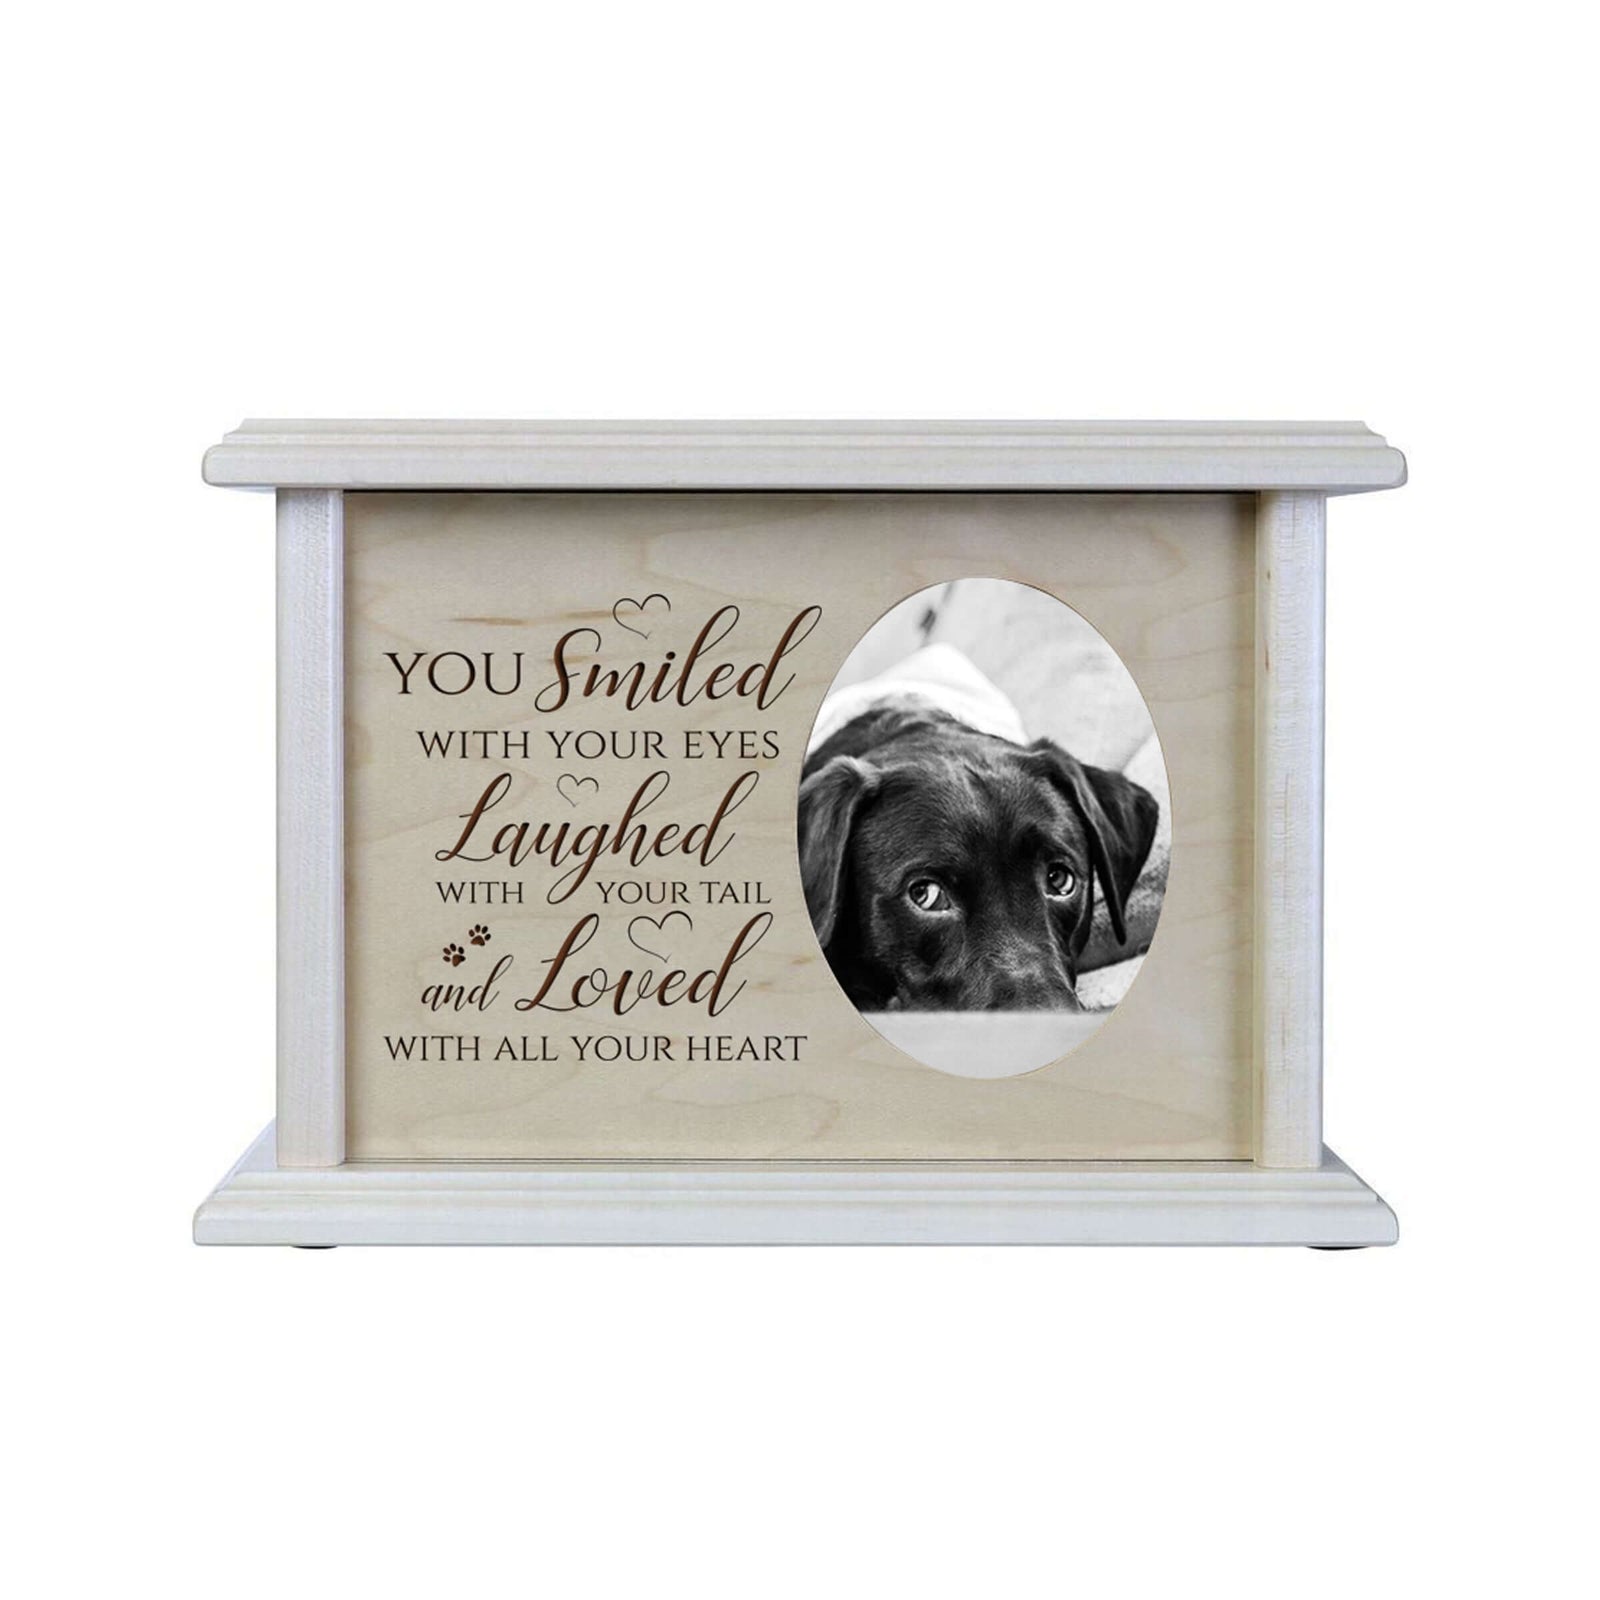 Pet Memorial Picture Cremation Urn Box for Dog or Cat - You Smiled With Your Eyes